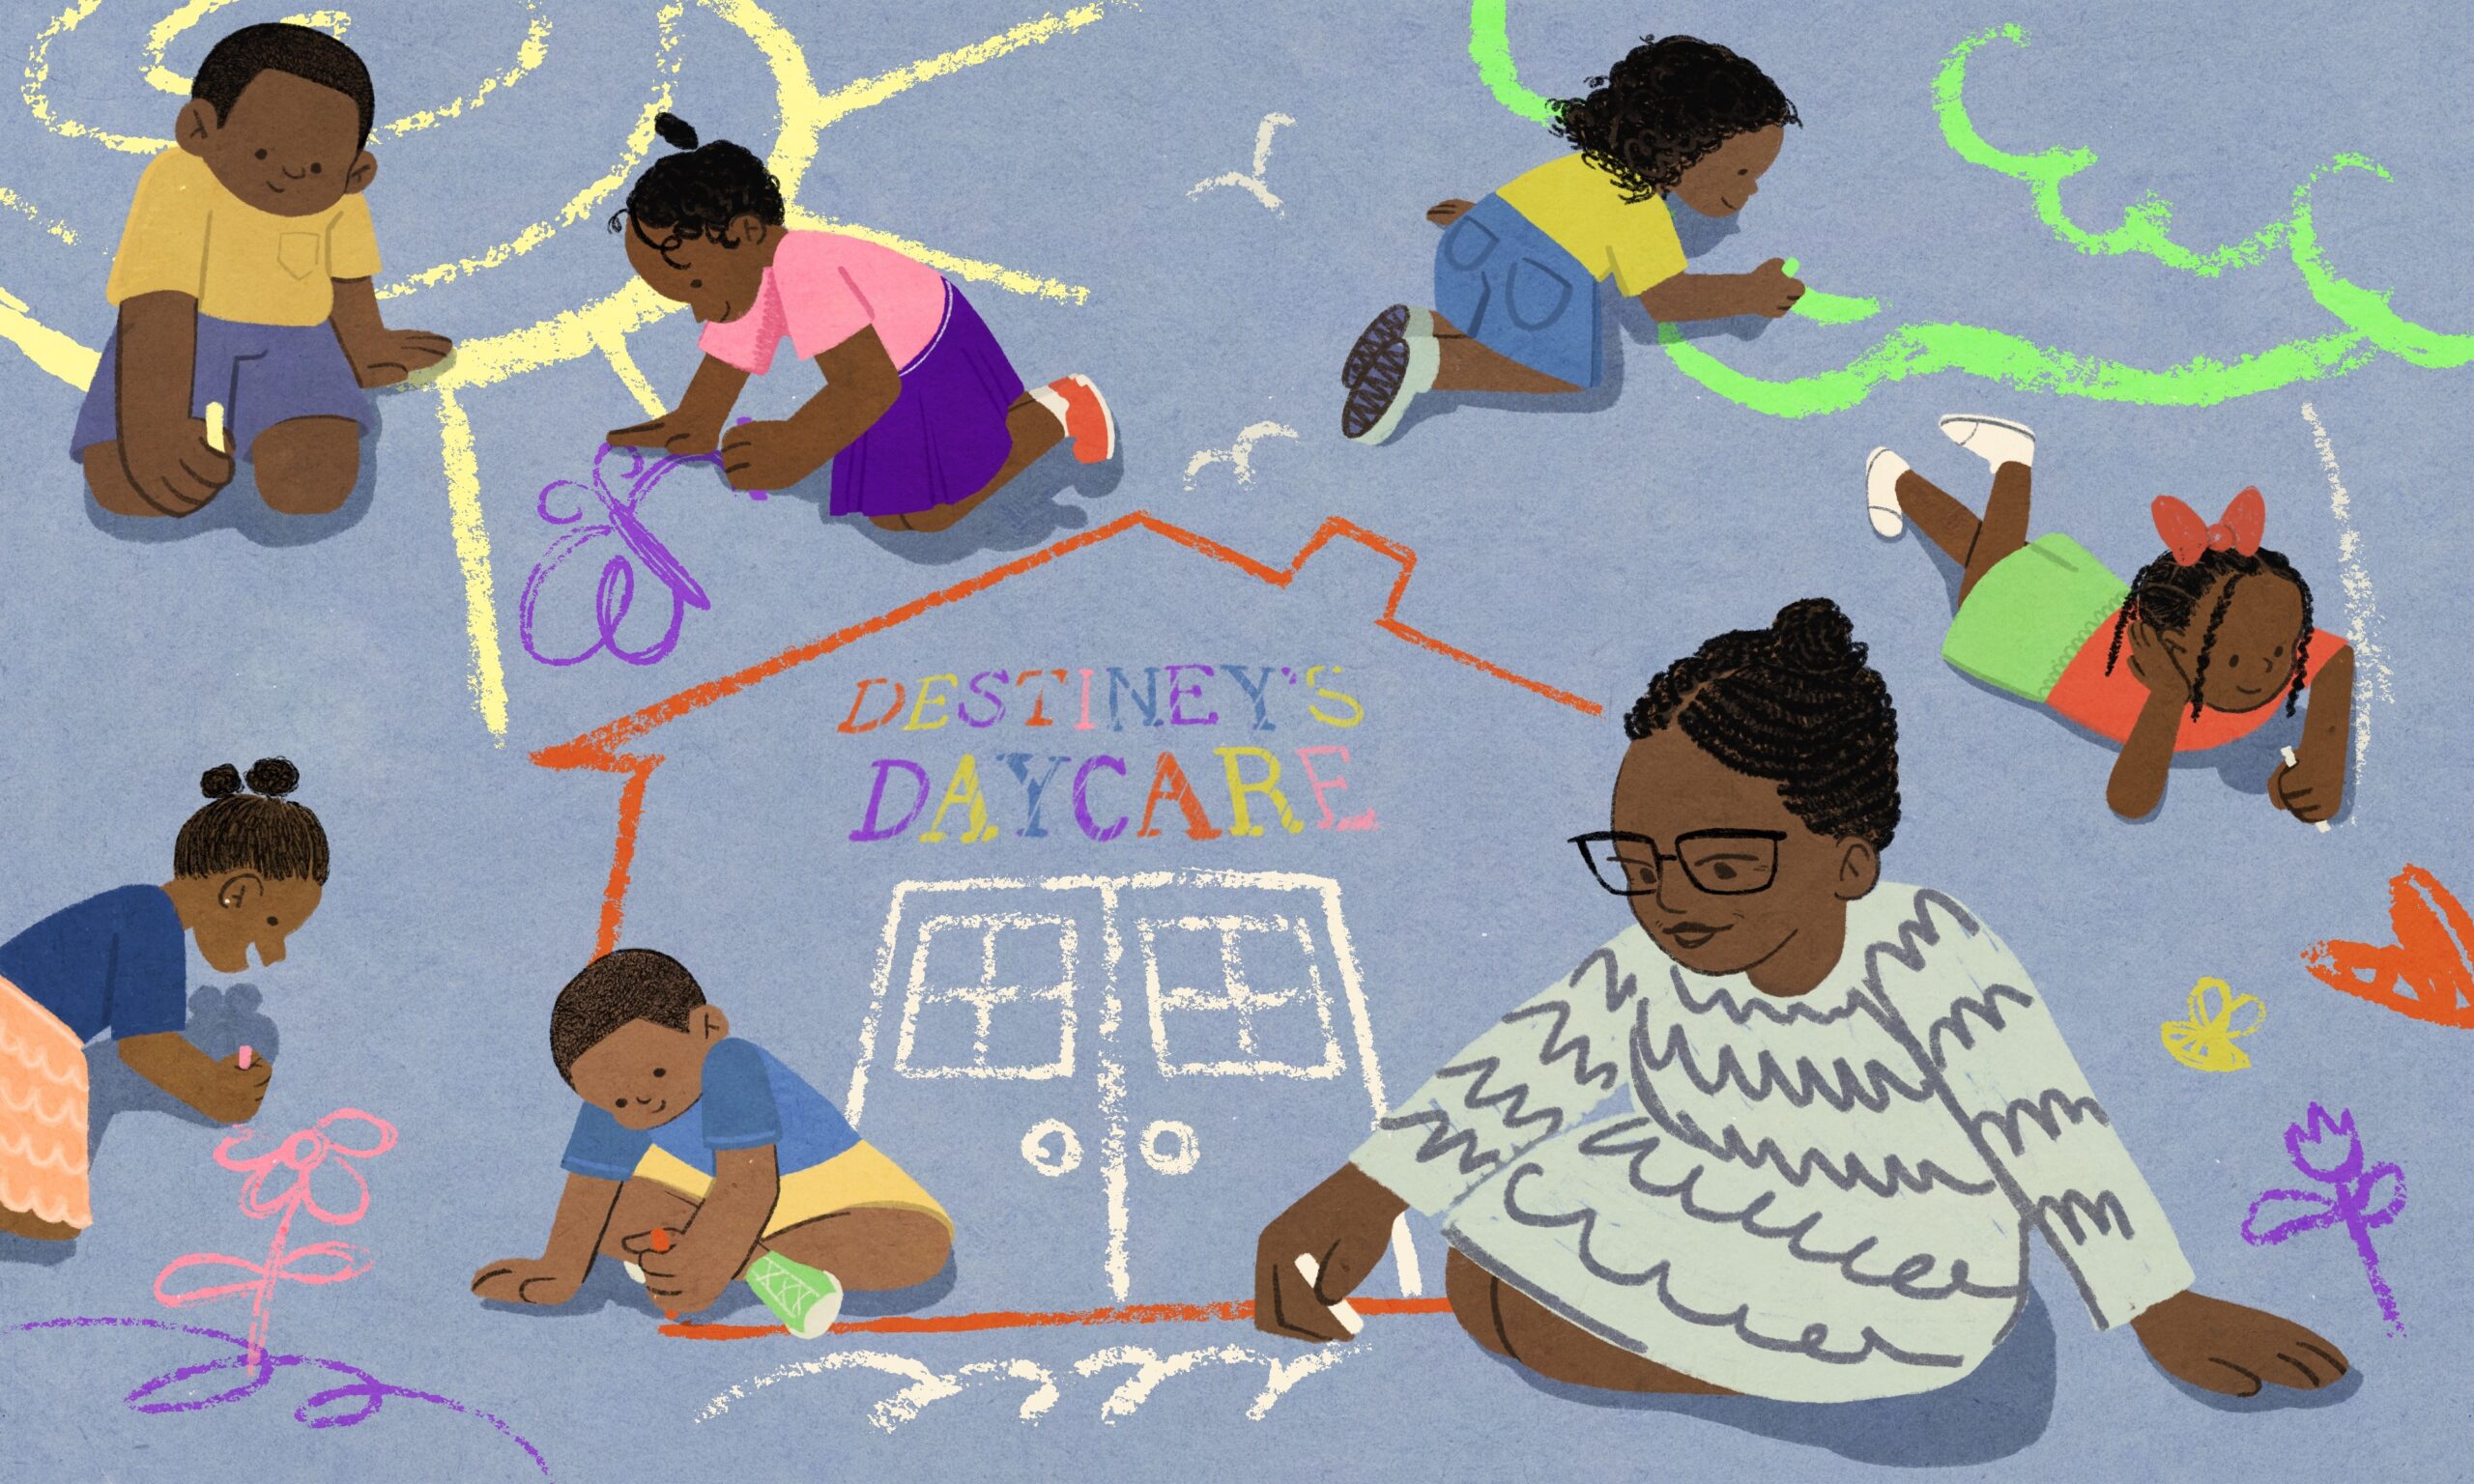 Deborah Holmes and six young children are happily drawing “Destiney’s Daycare,” a flower, a bright sun, a butterfly, and a tree together on the ground using chalk.